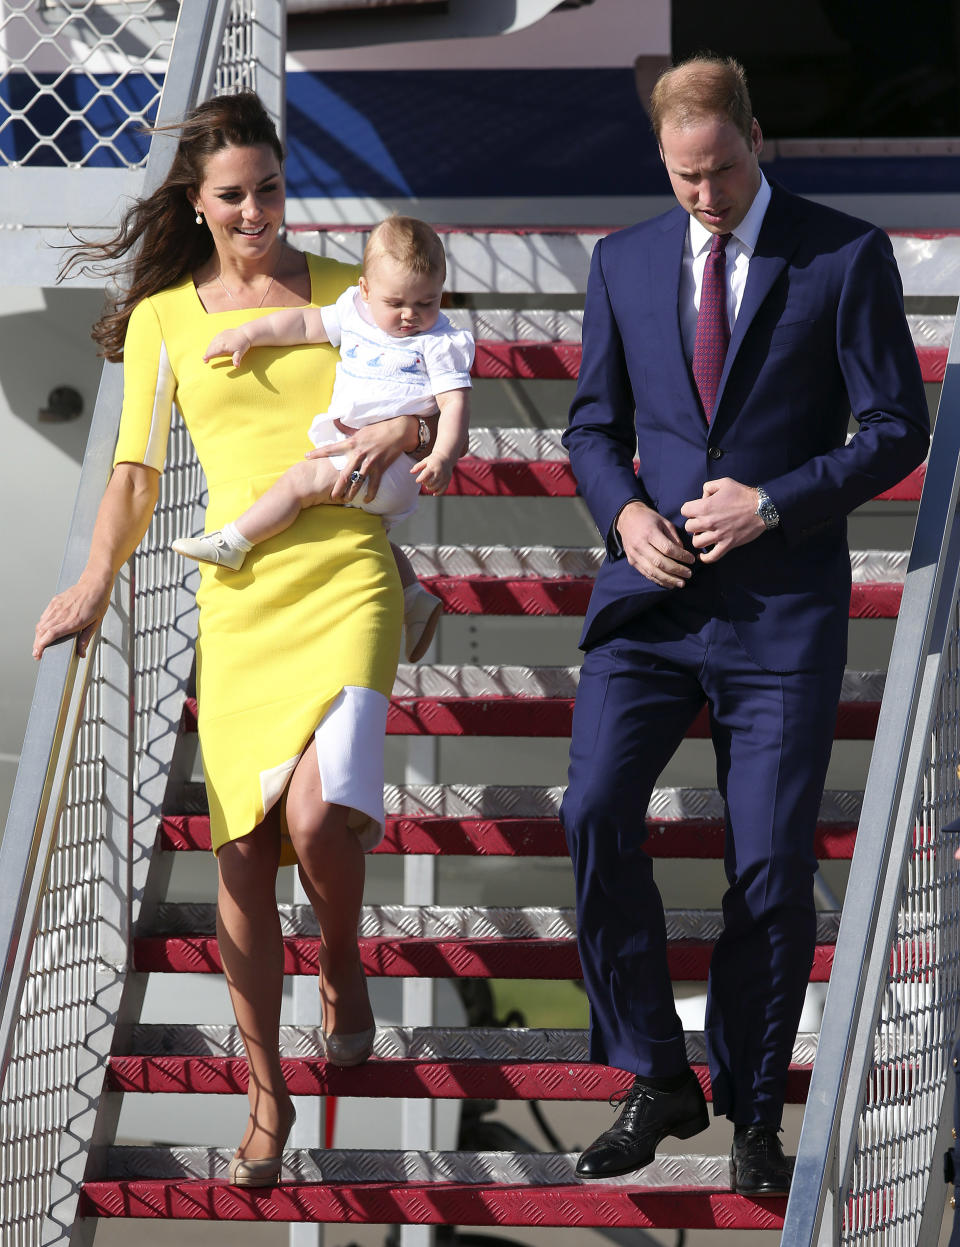 Britain's Prince William with his wife Kate, Duchess of Cambridge, and Prince George, arrives in Sydney Wednesday, April 16, 2014. The royal couple are on a three-week tour of Australia and New Zealand, the first official trip overseas with their son, Prince George. (AP Photo/Rob Griffith)